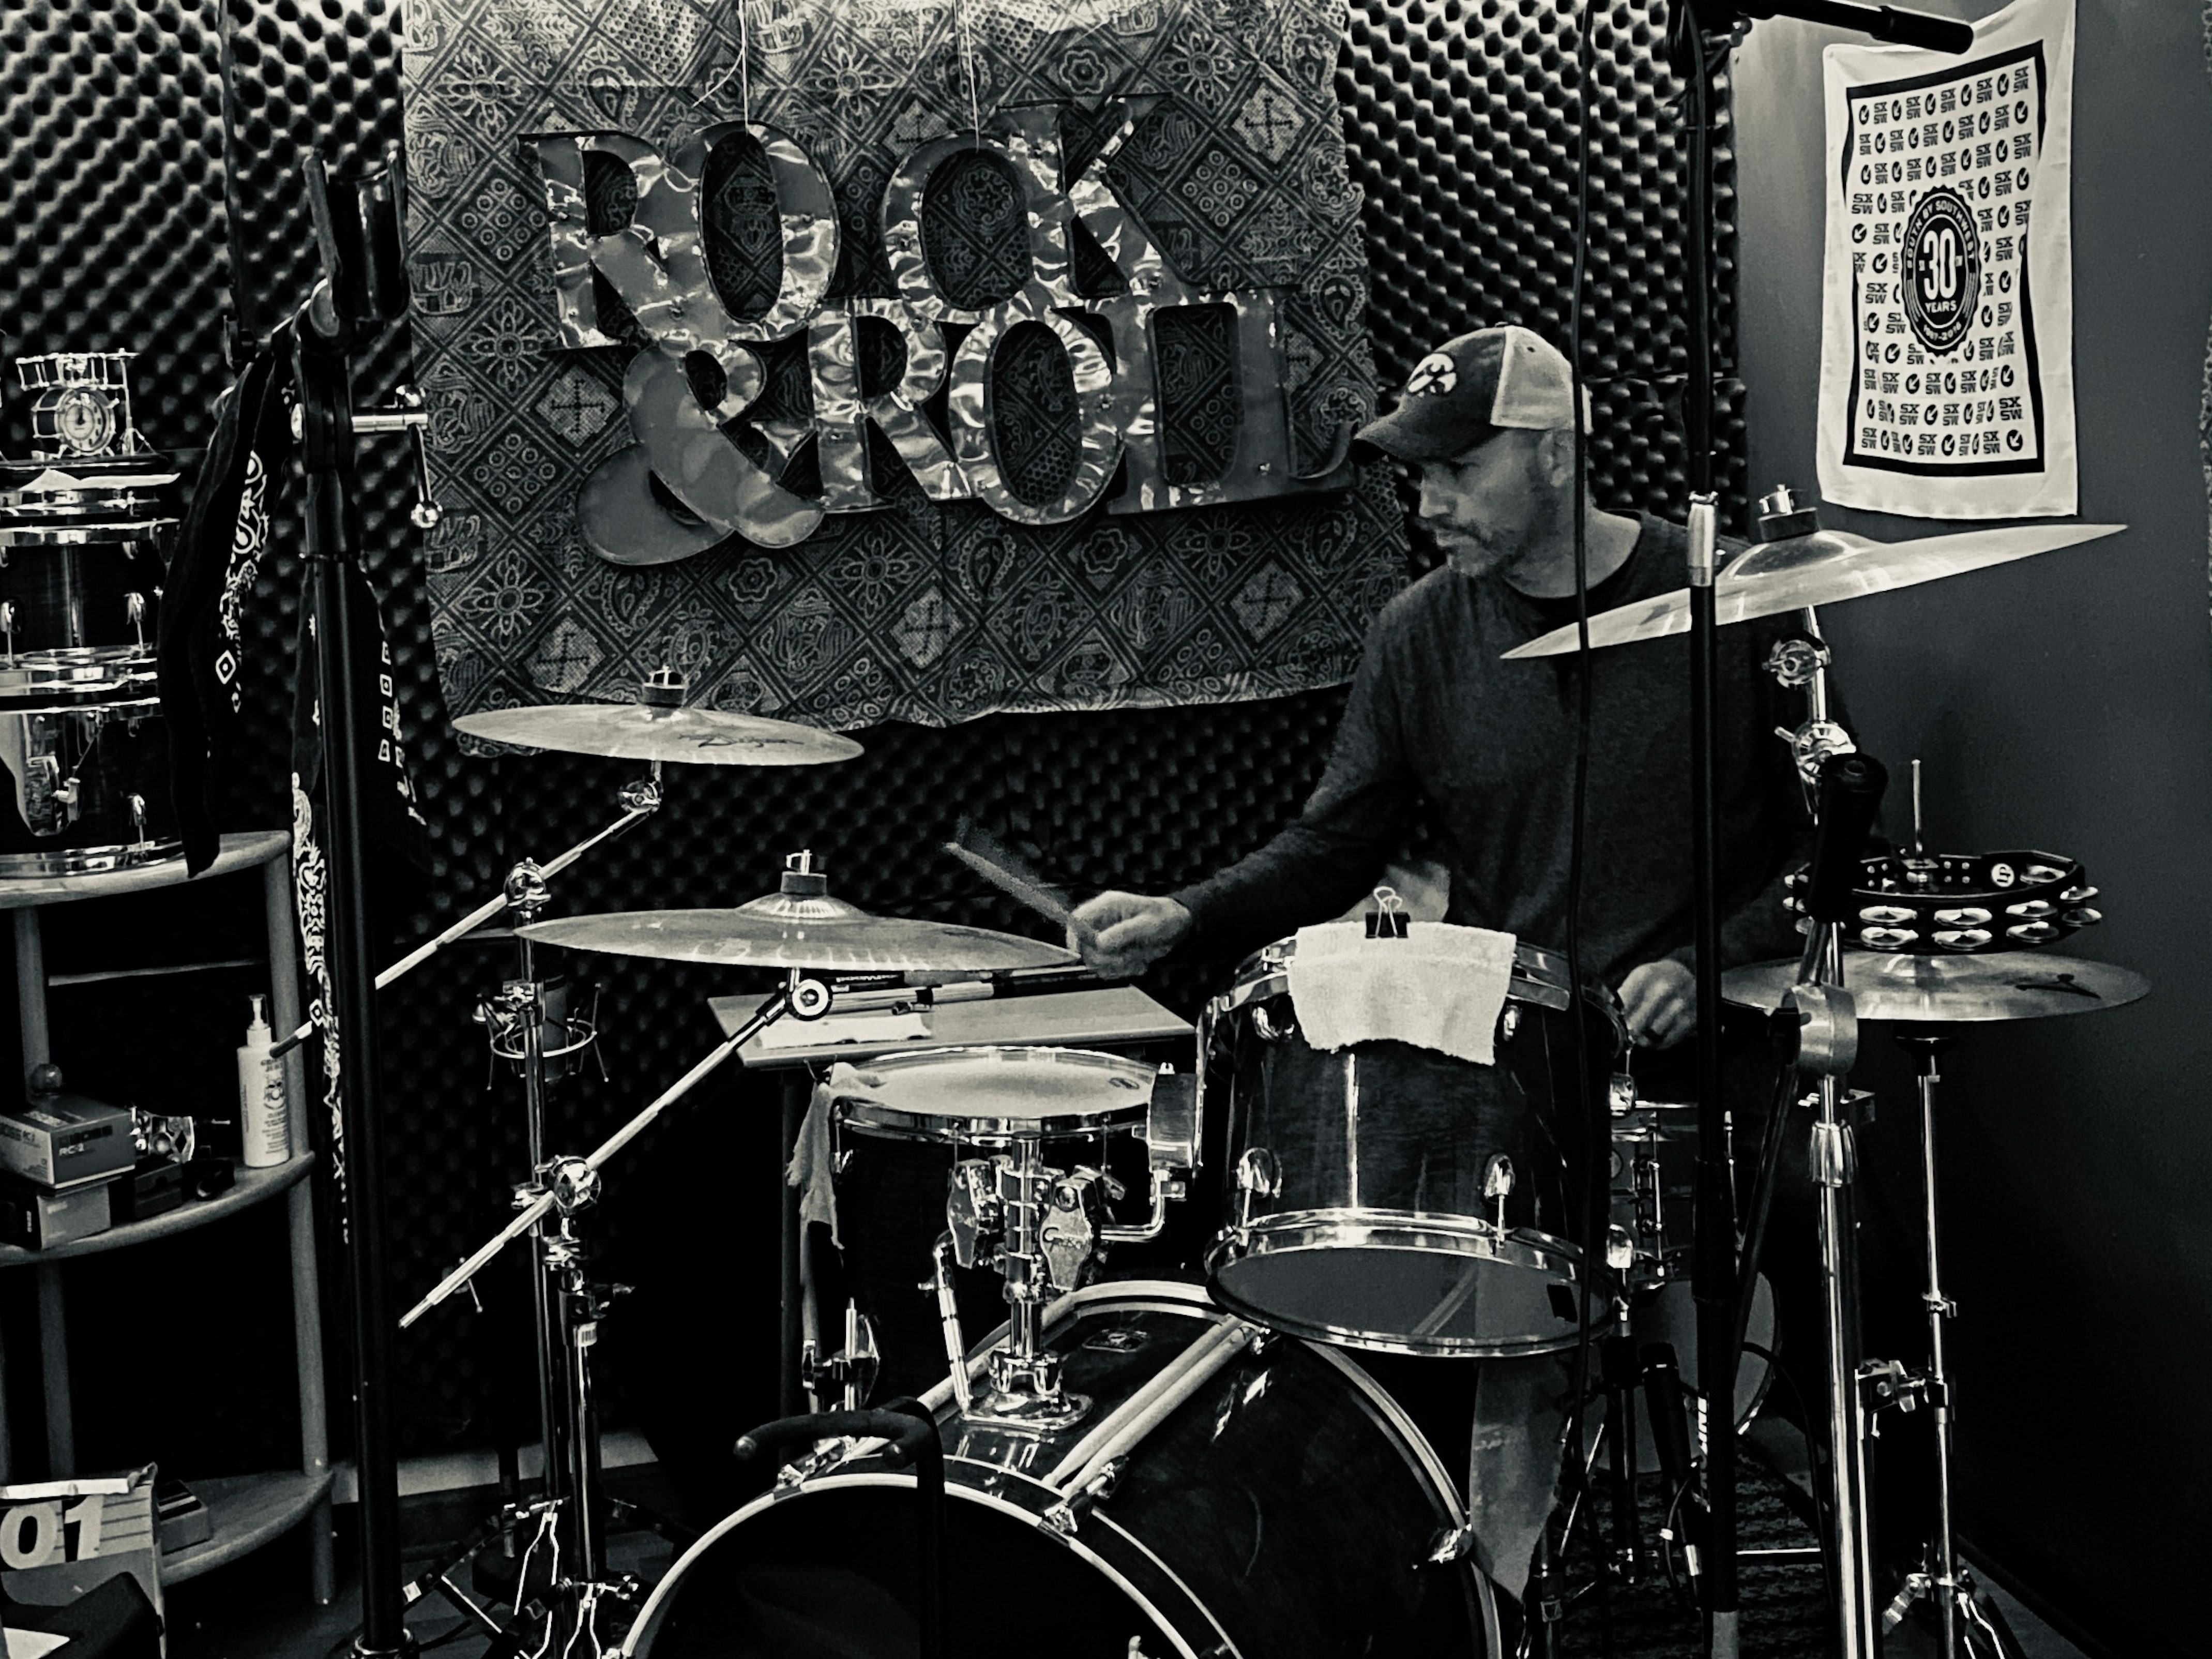 Mike Echlin on Drums in studio